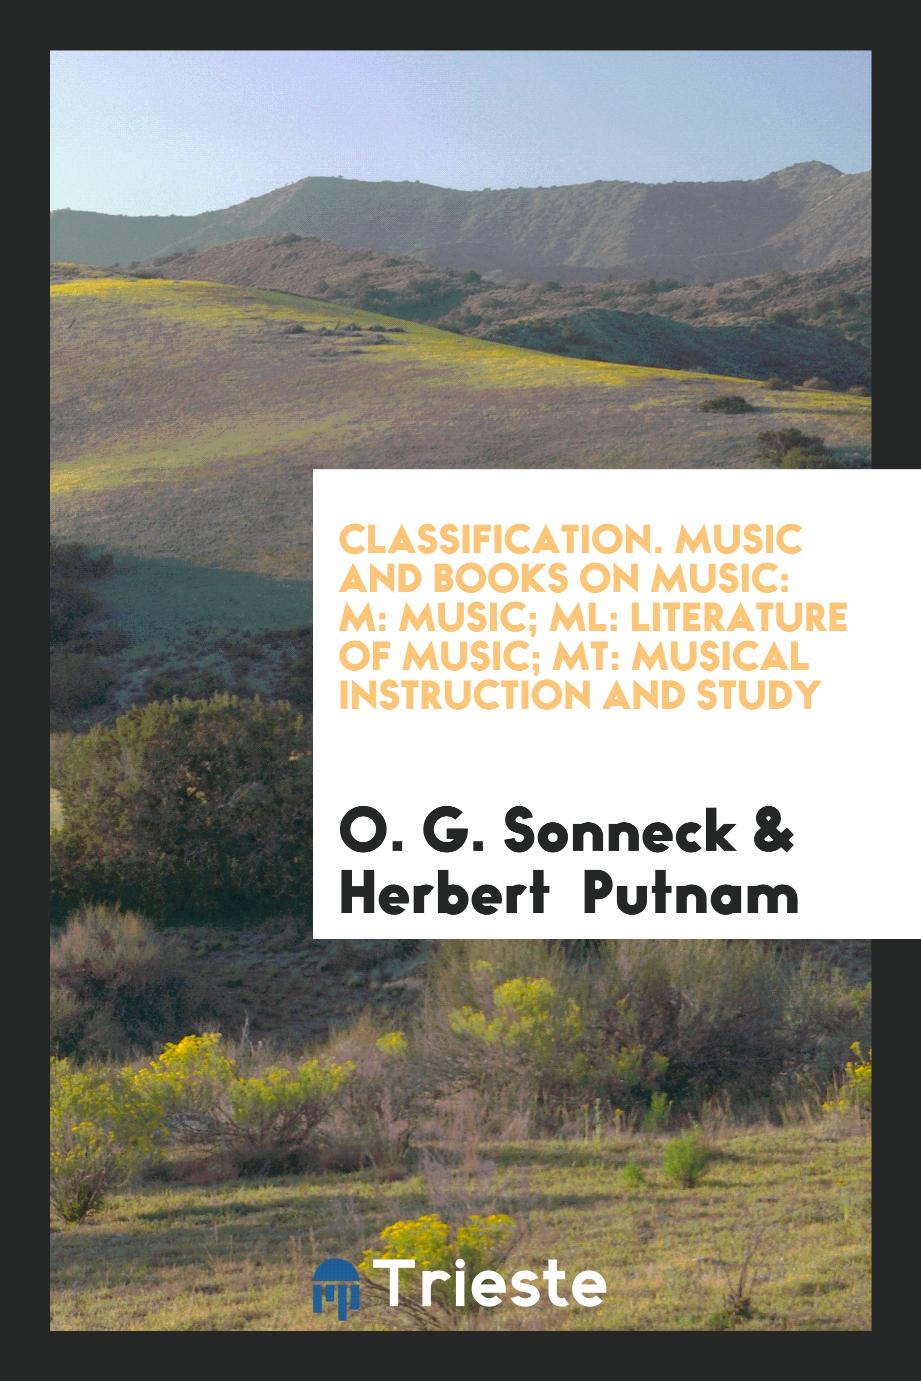 Classification. Music and Books on Music: M: Music; ML: Literature of Music; MT: Musical Instruction and Study